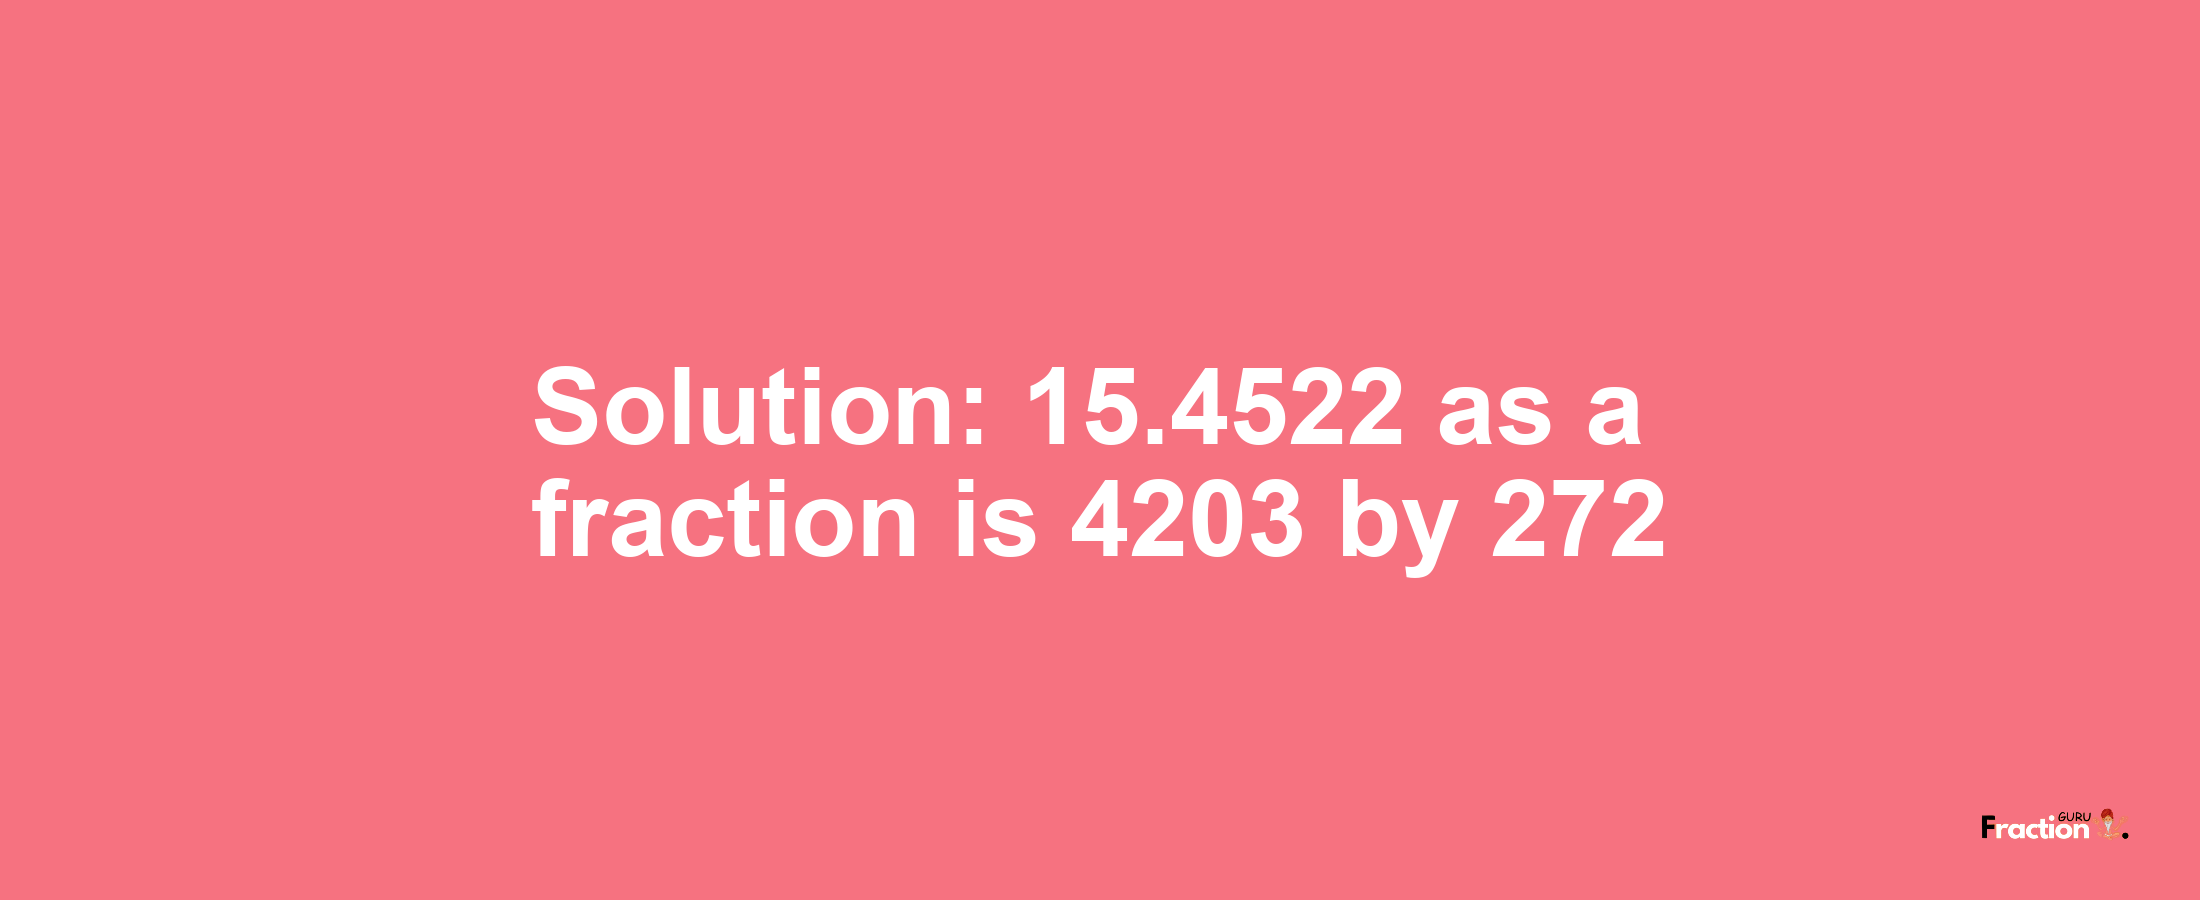 Solution:15.4522 as a fraction is 4203/272